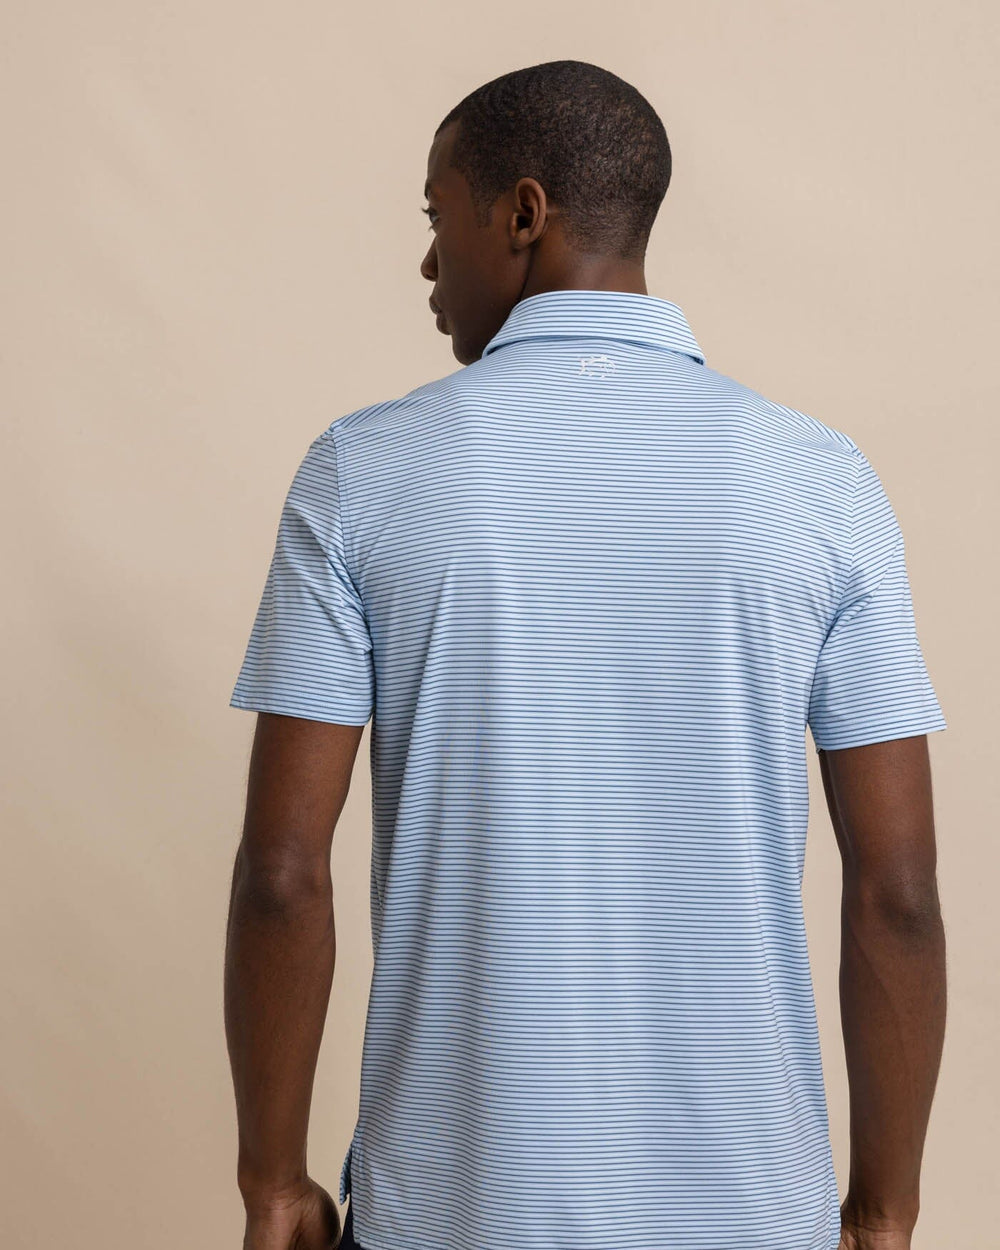 The back view of the Southern Tide brrr-eeze Baytop Stripe Performance Polo by Southern Tide - Clearwater Blue